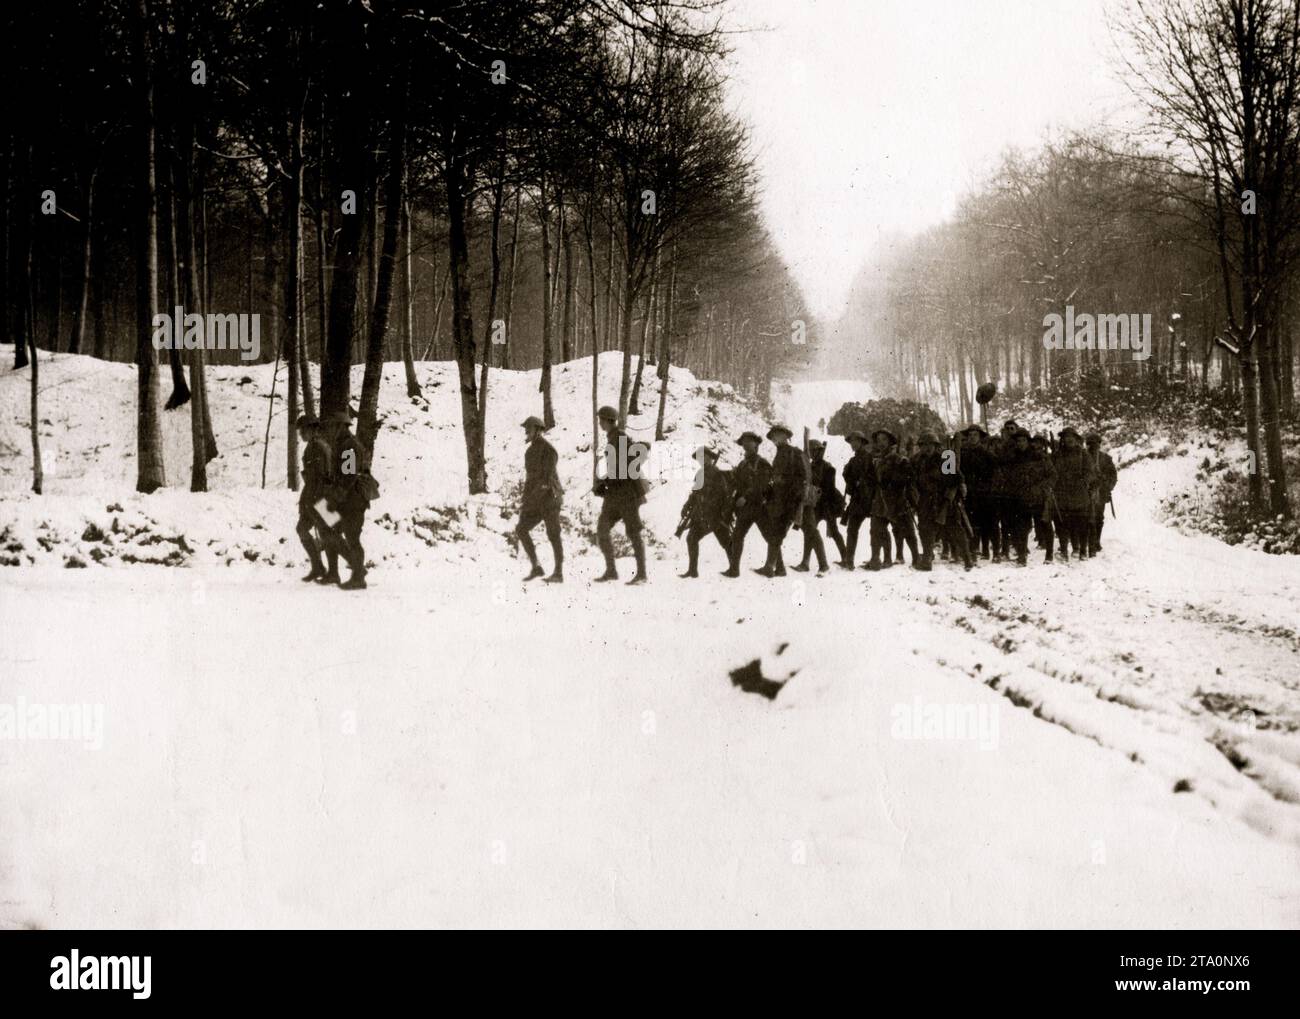 WW1 World War I - Troops marching through a wood in heavy snow Stock Photo